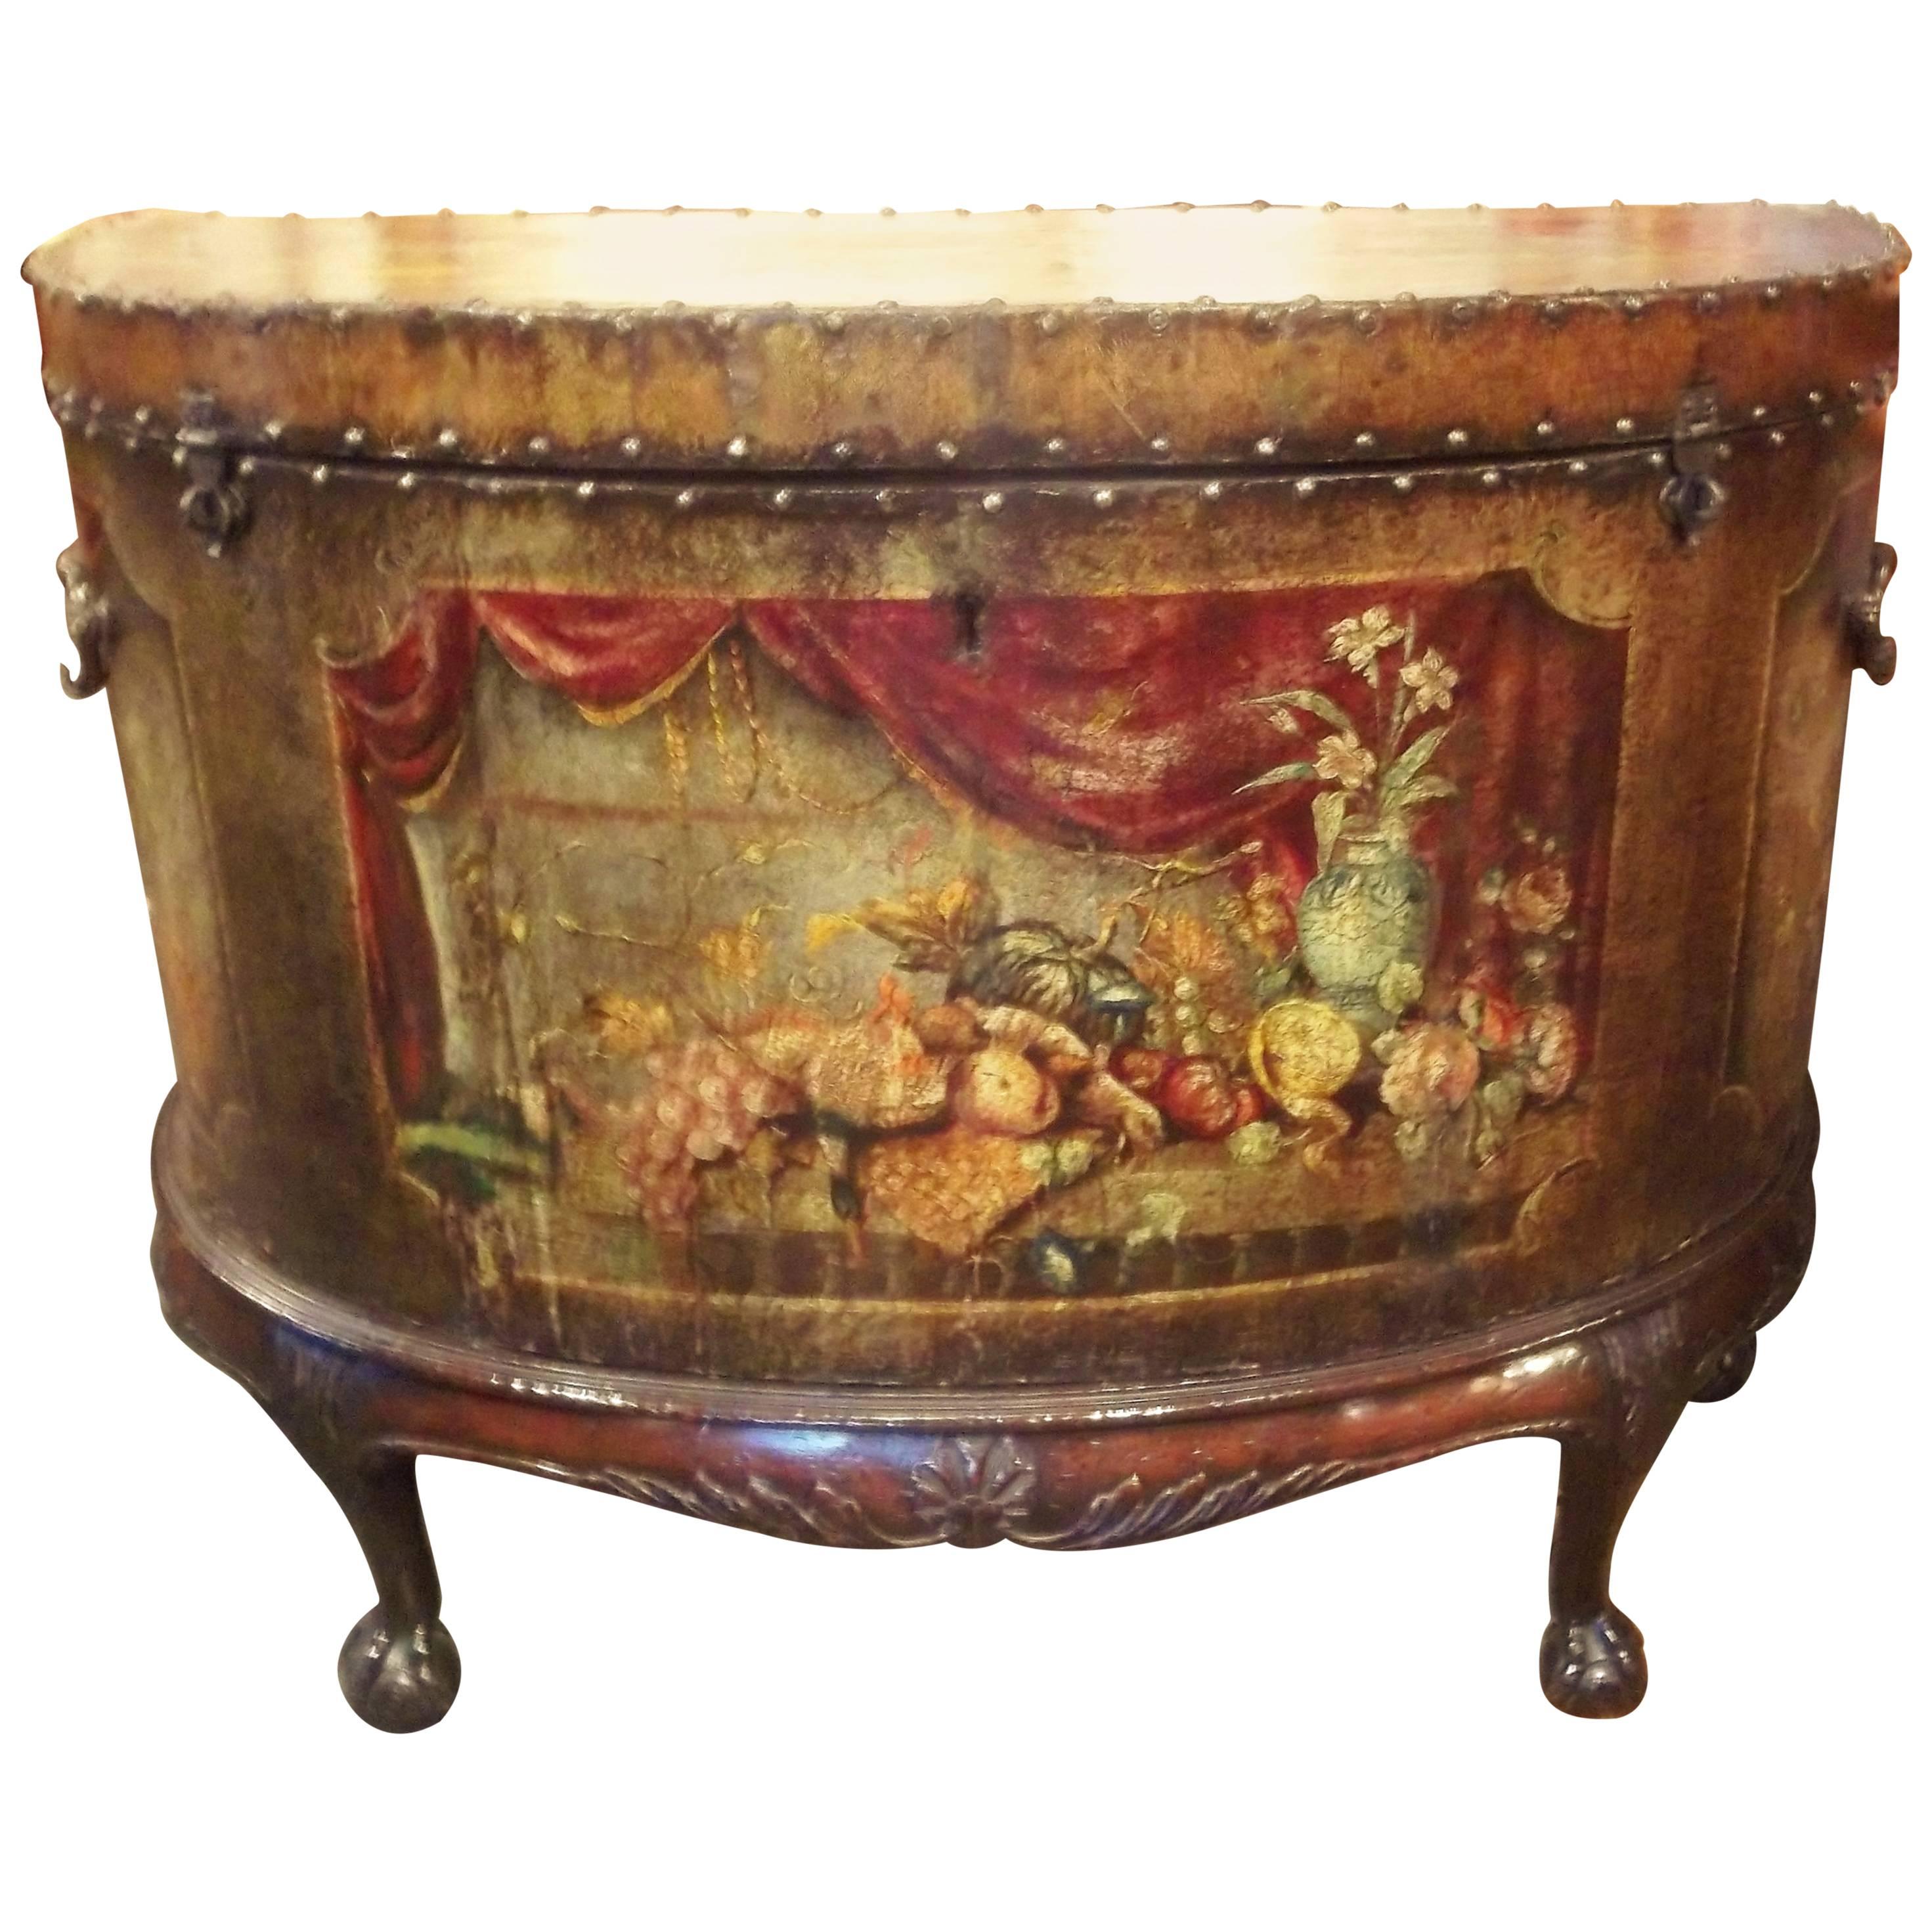  English George III Painted Leather Chest on Stand 